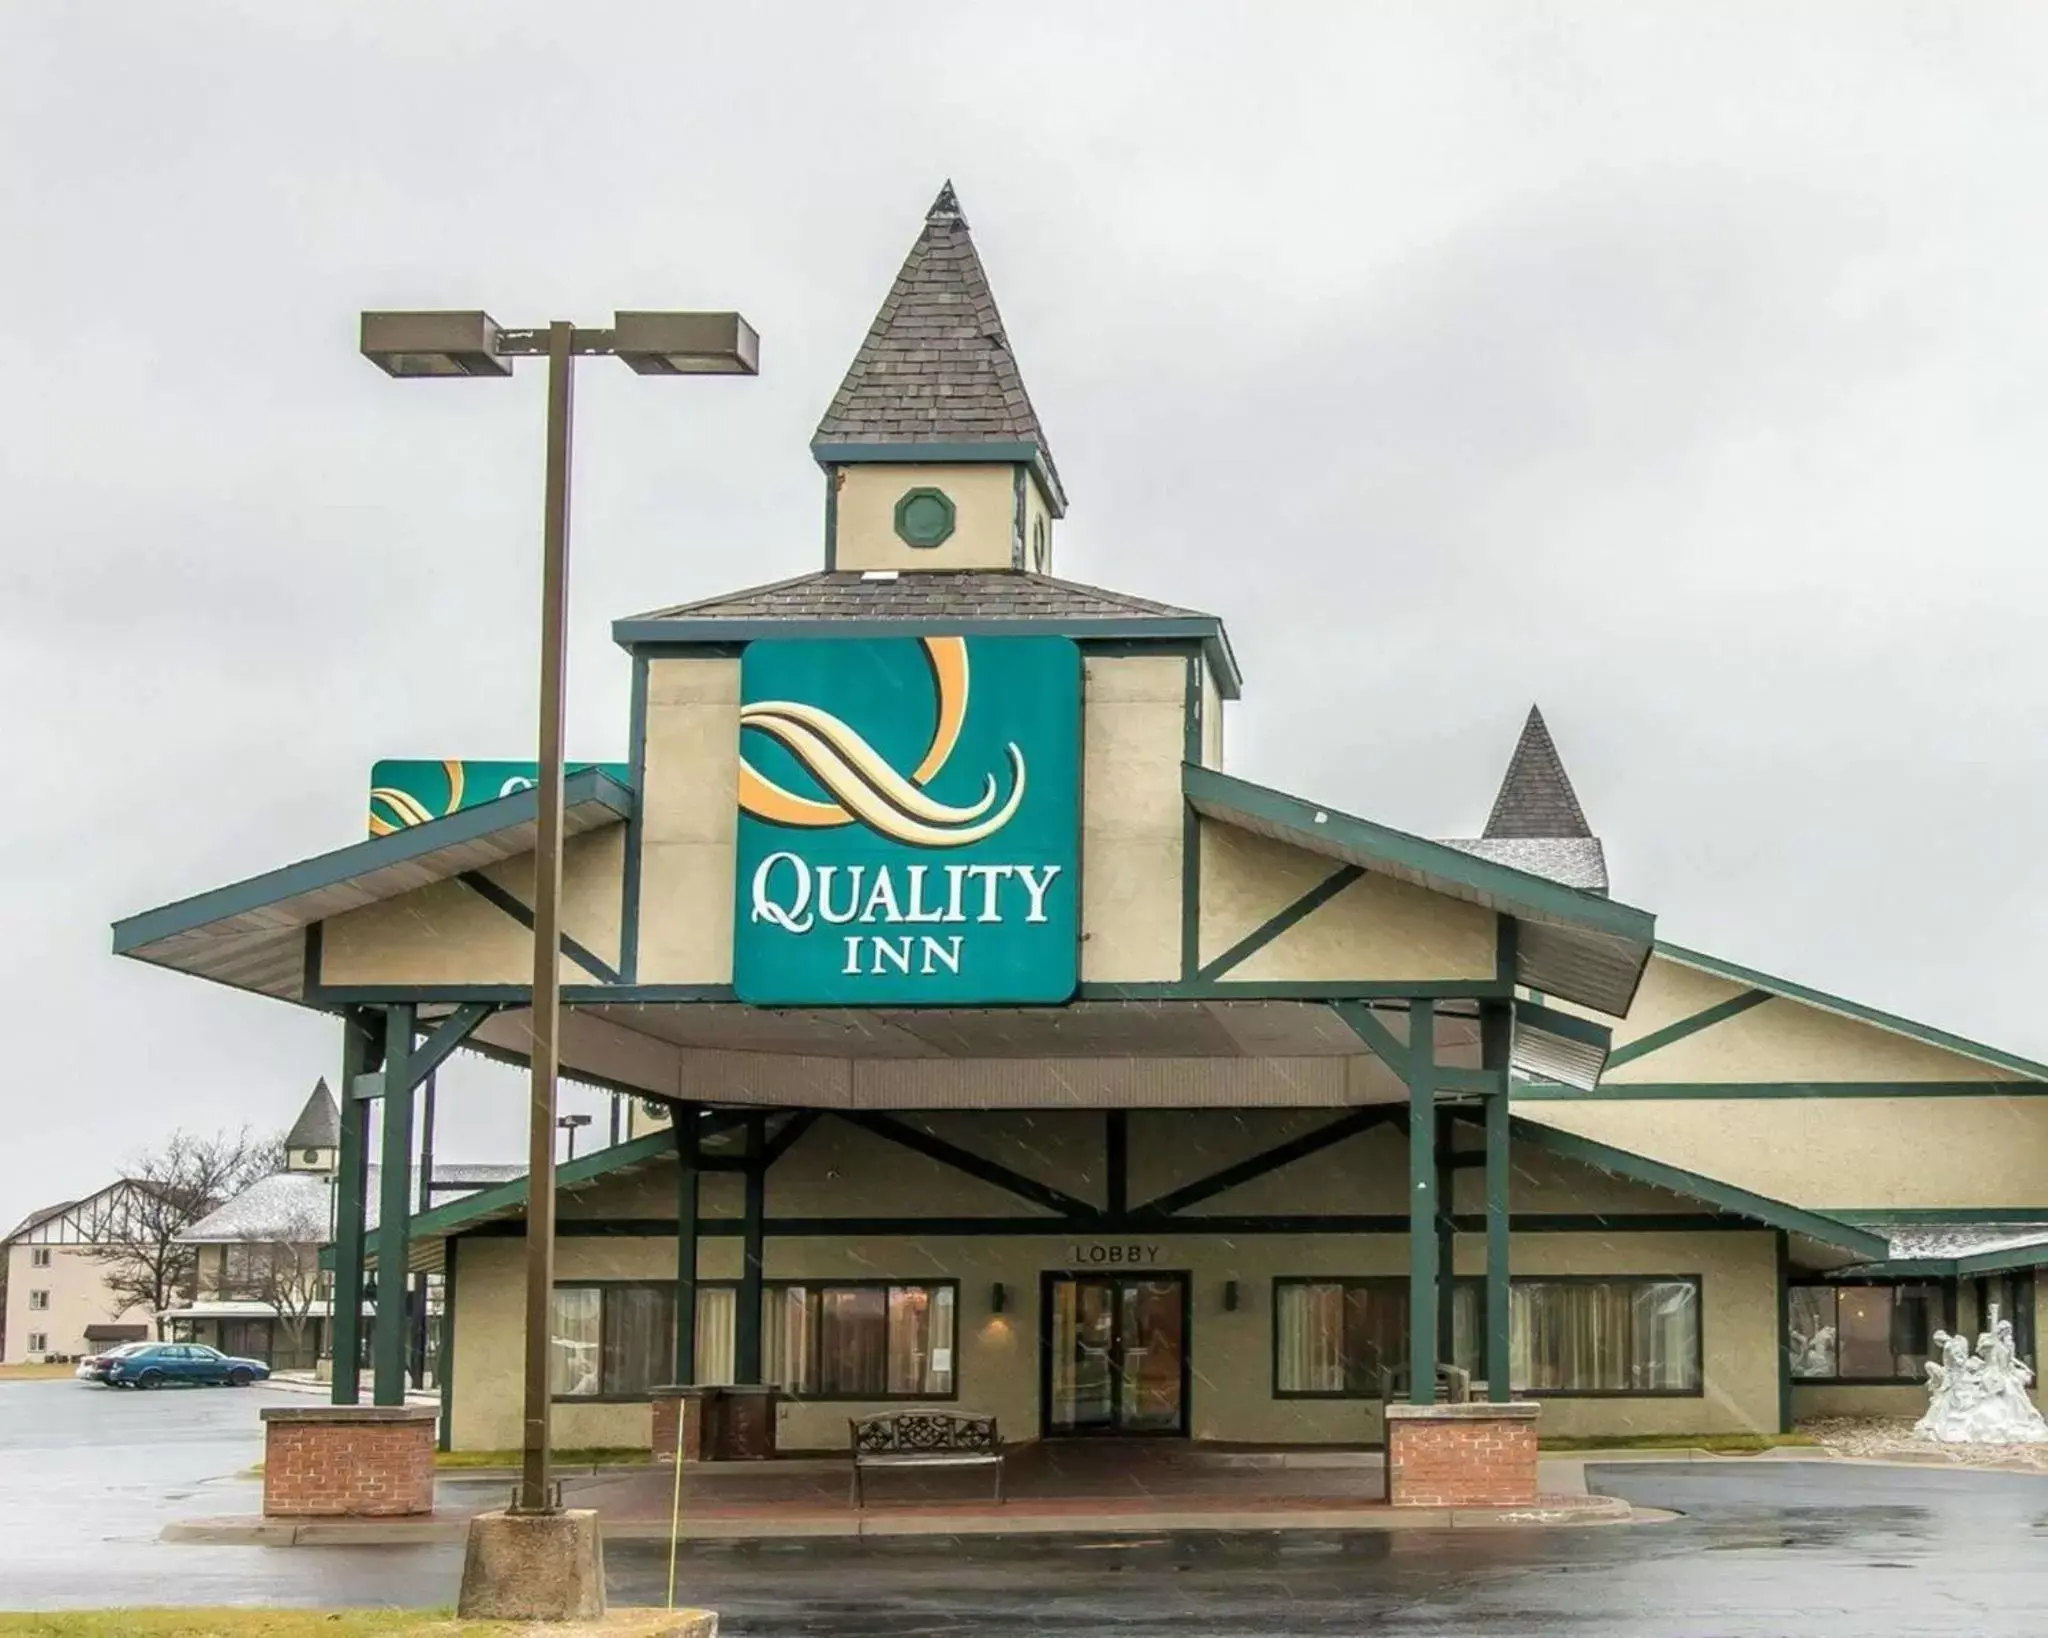 Property building in Quality Inn of Gaylord